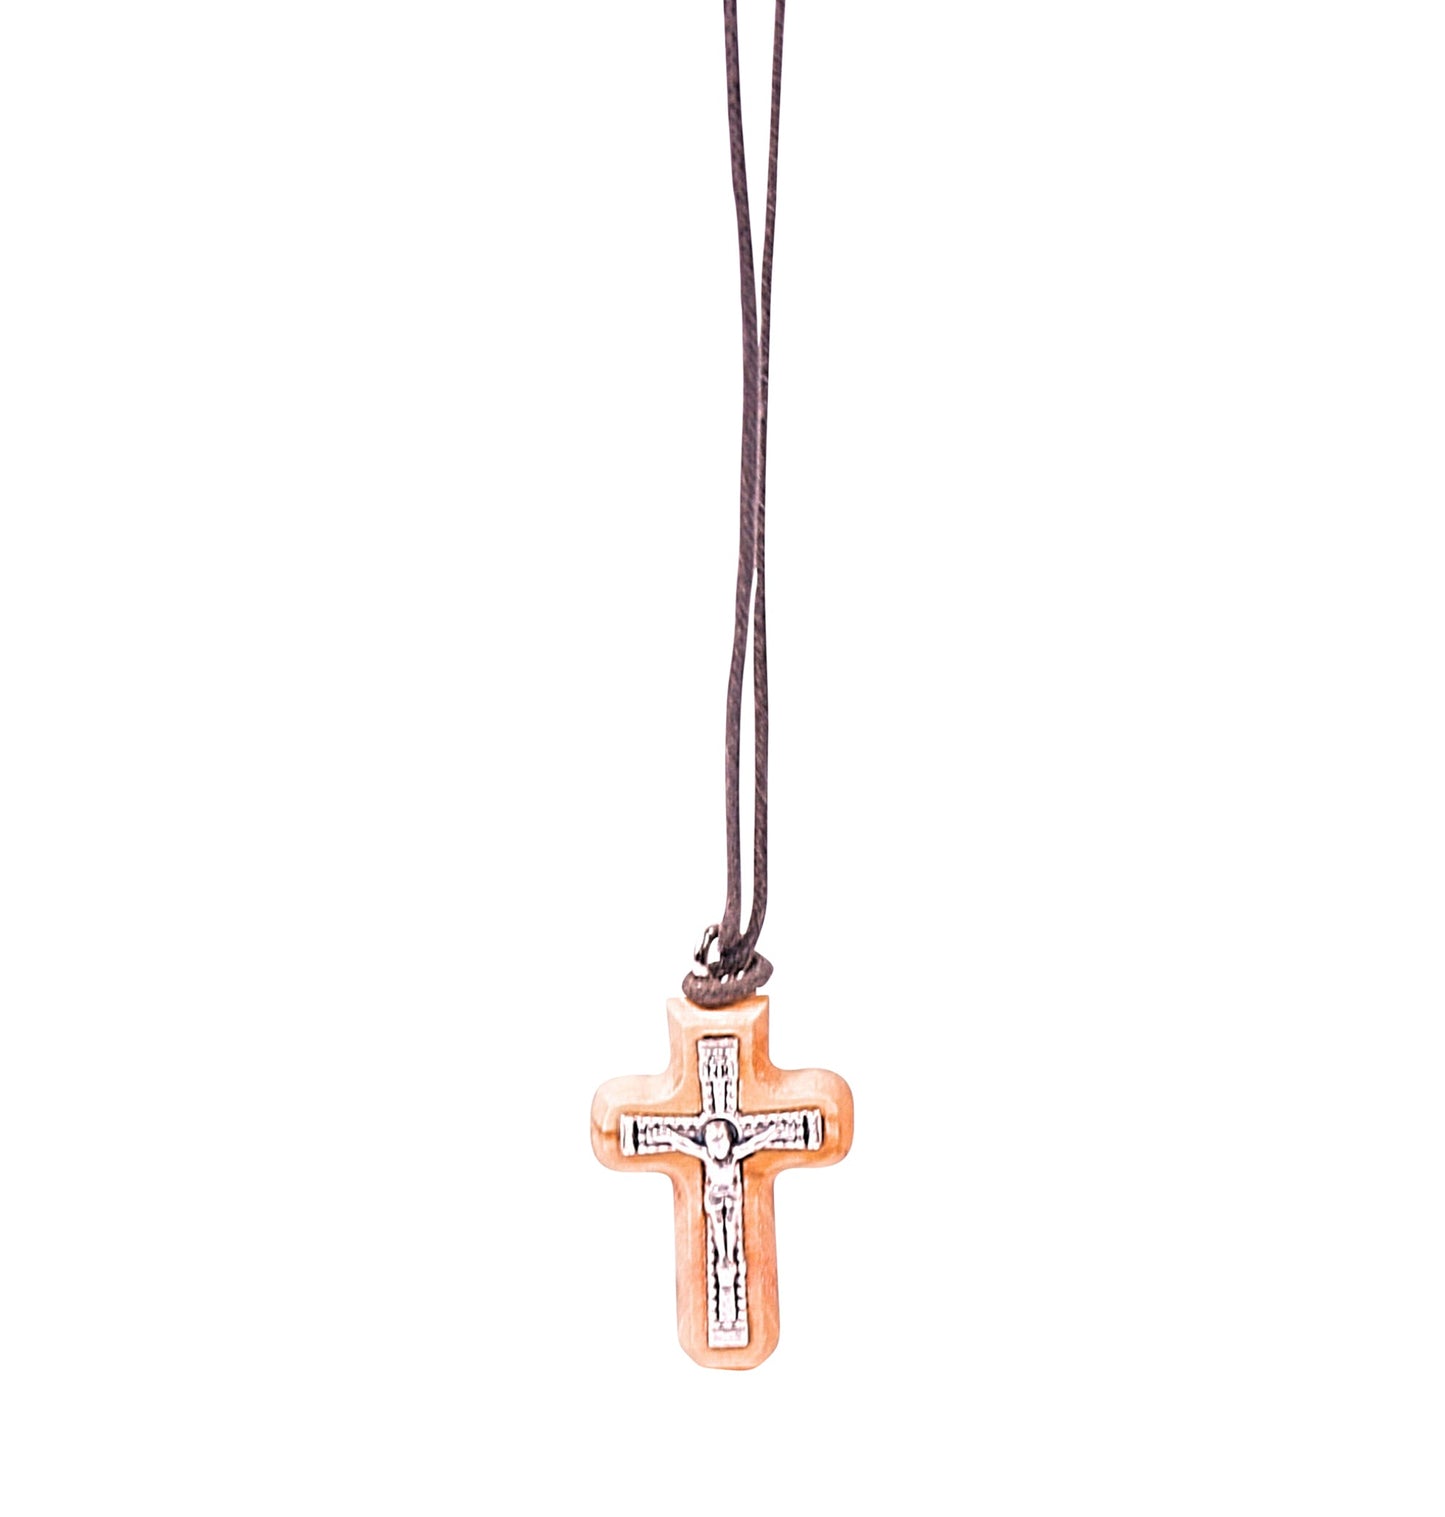 Olive wood crucifix pendant with a silver-tone metal depiction of Jesus, accompanied by an 'INRI' sign at the top, suspended from a soft cotton cord.